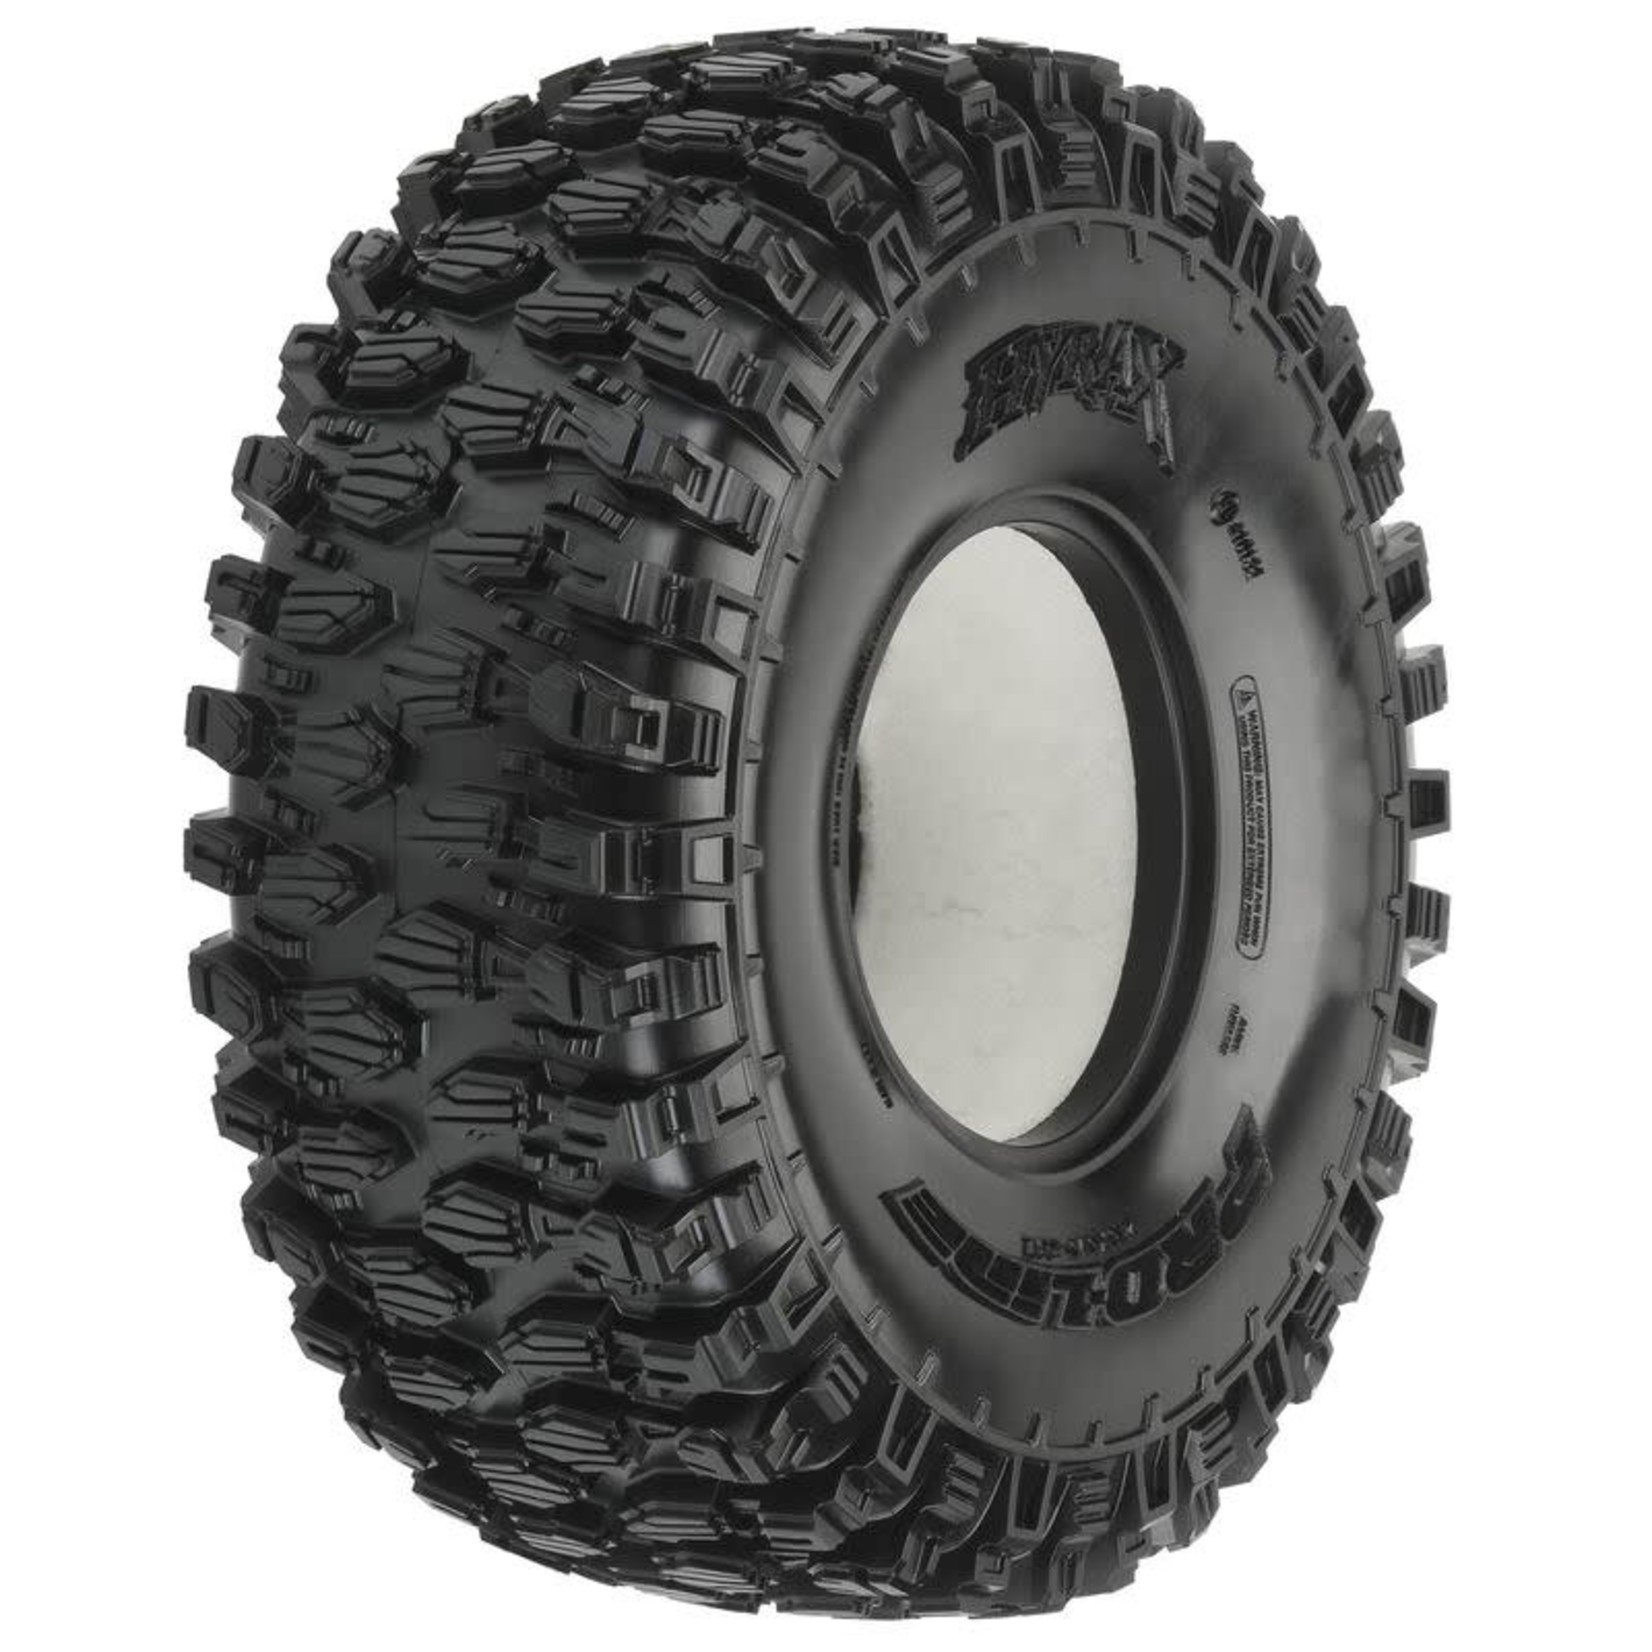 Pro-line Racing PRO1013214 Pro-Line 1/10 Hyrax G8 Front/Rear 2.2" Rock Crawling Tires (2)